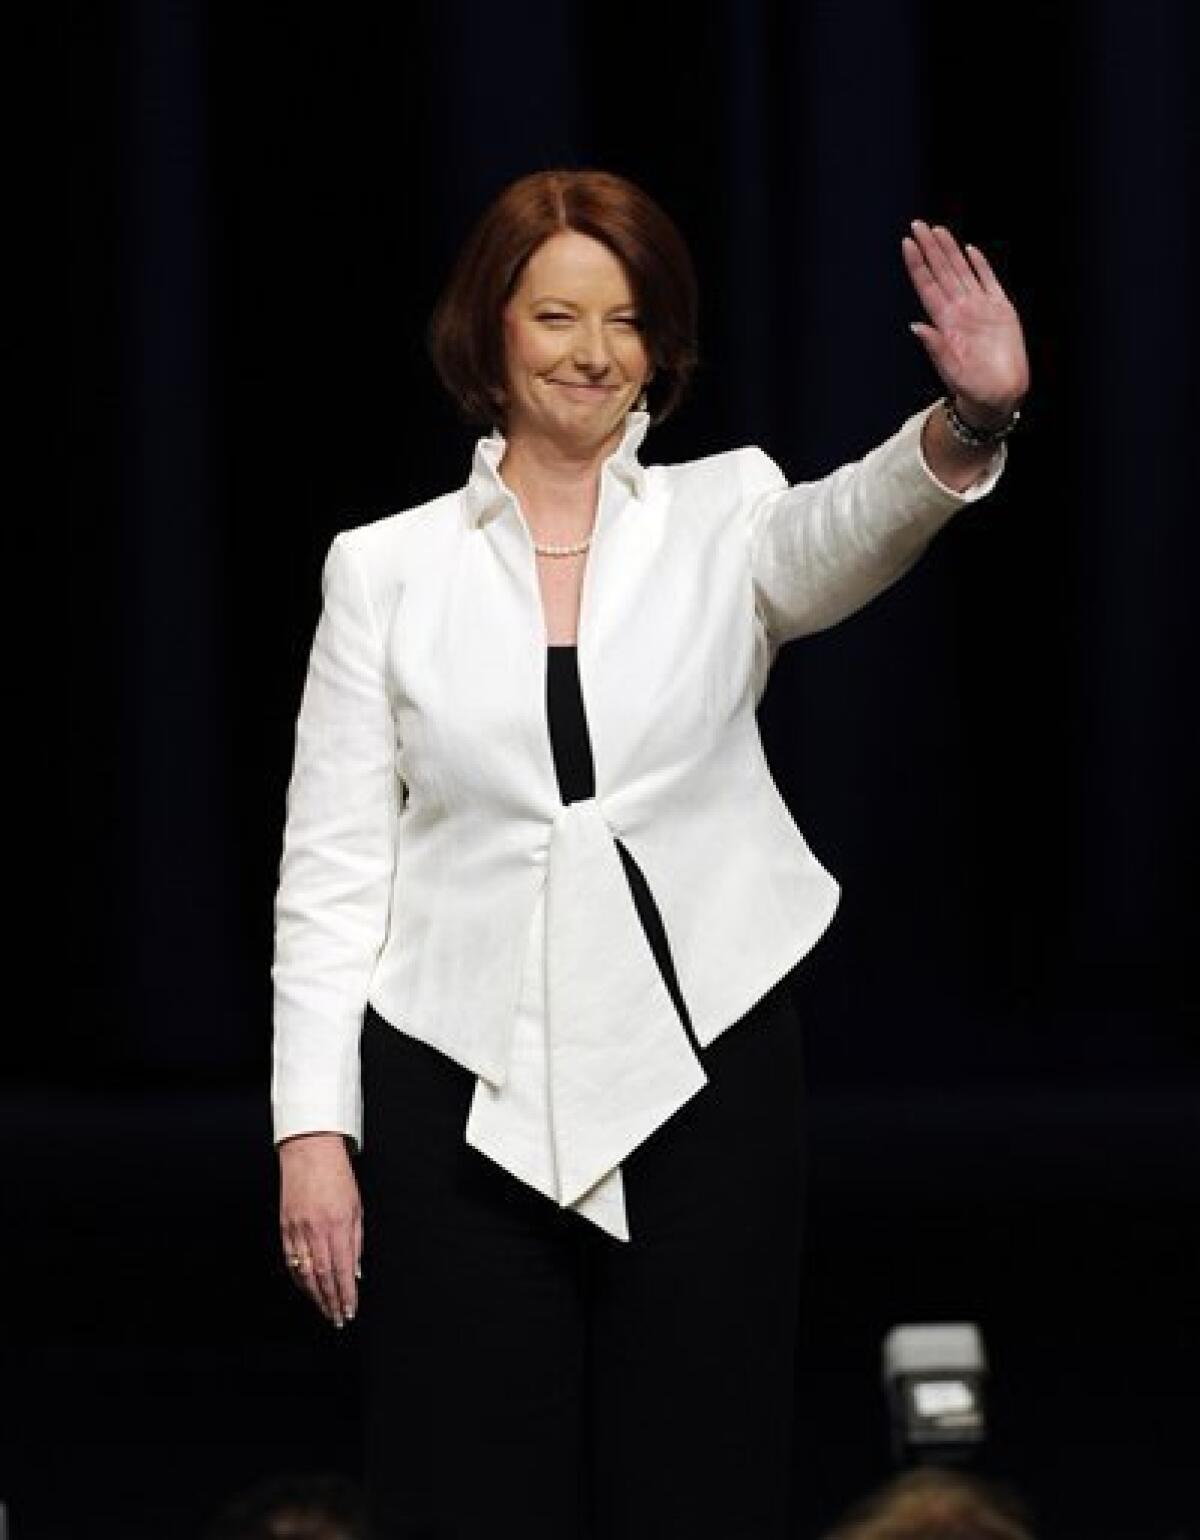 Australian Prime Minister Julia Gillard, leader of the Australian Labor Party, waves to the crowd after her post election speech in Melbourne, Saturday, Aug. 21, 2010. (AP Photo/Andrew Brownbill)